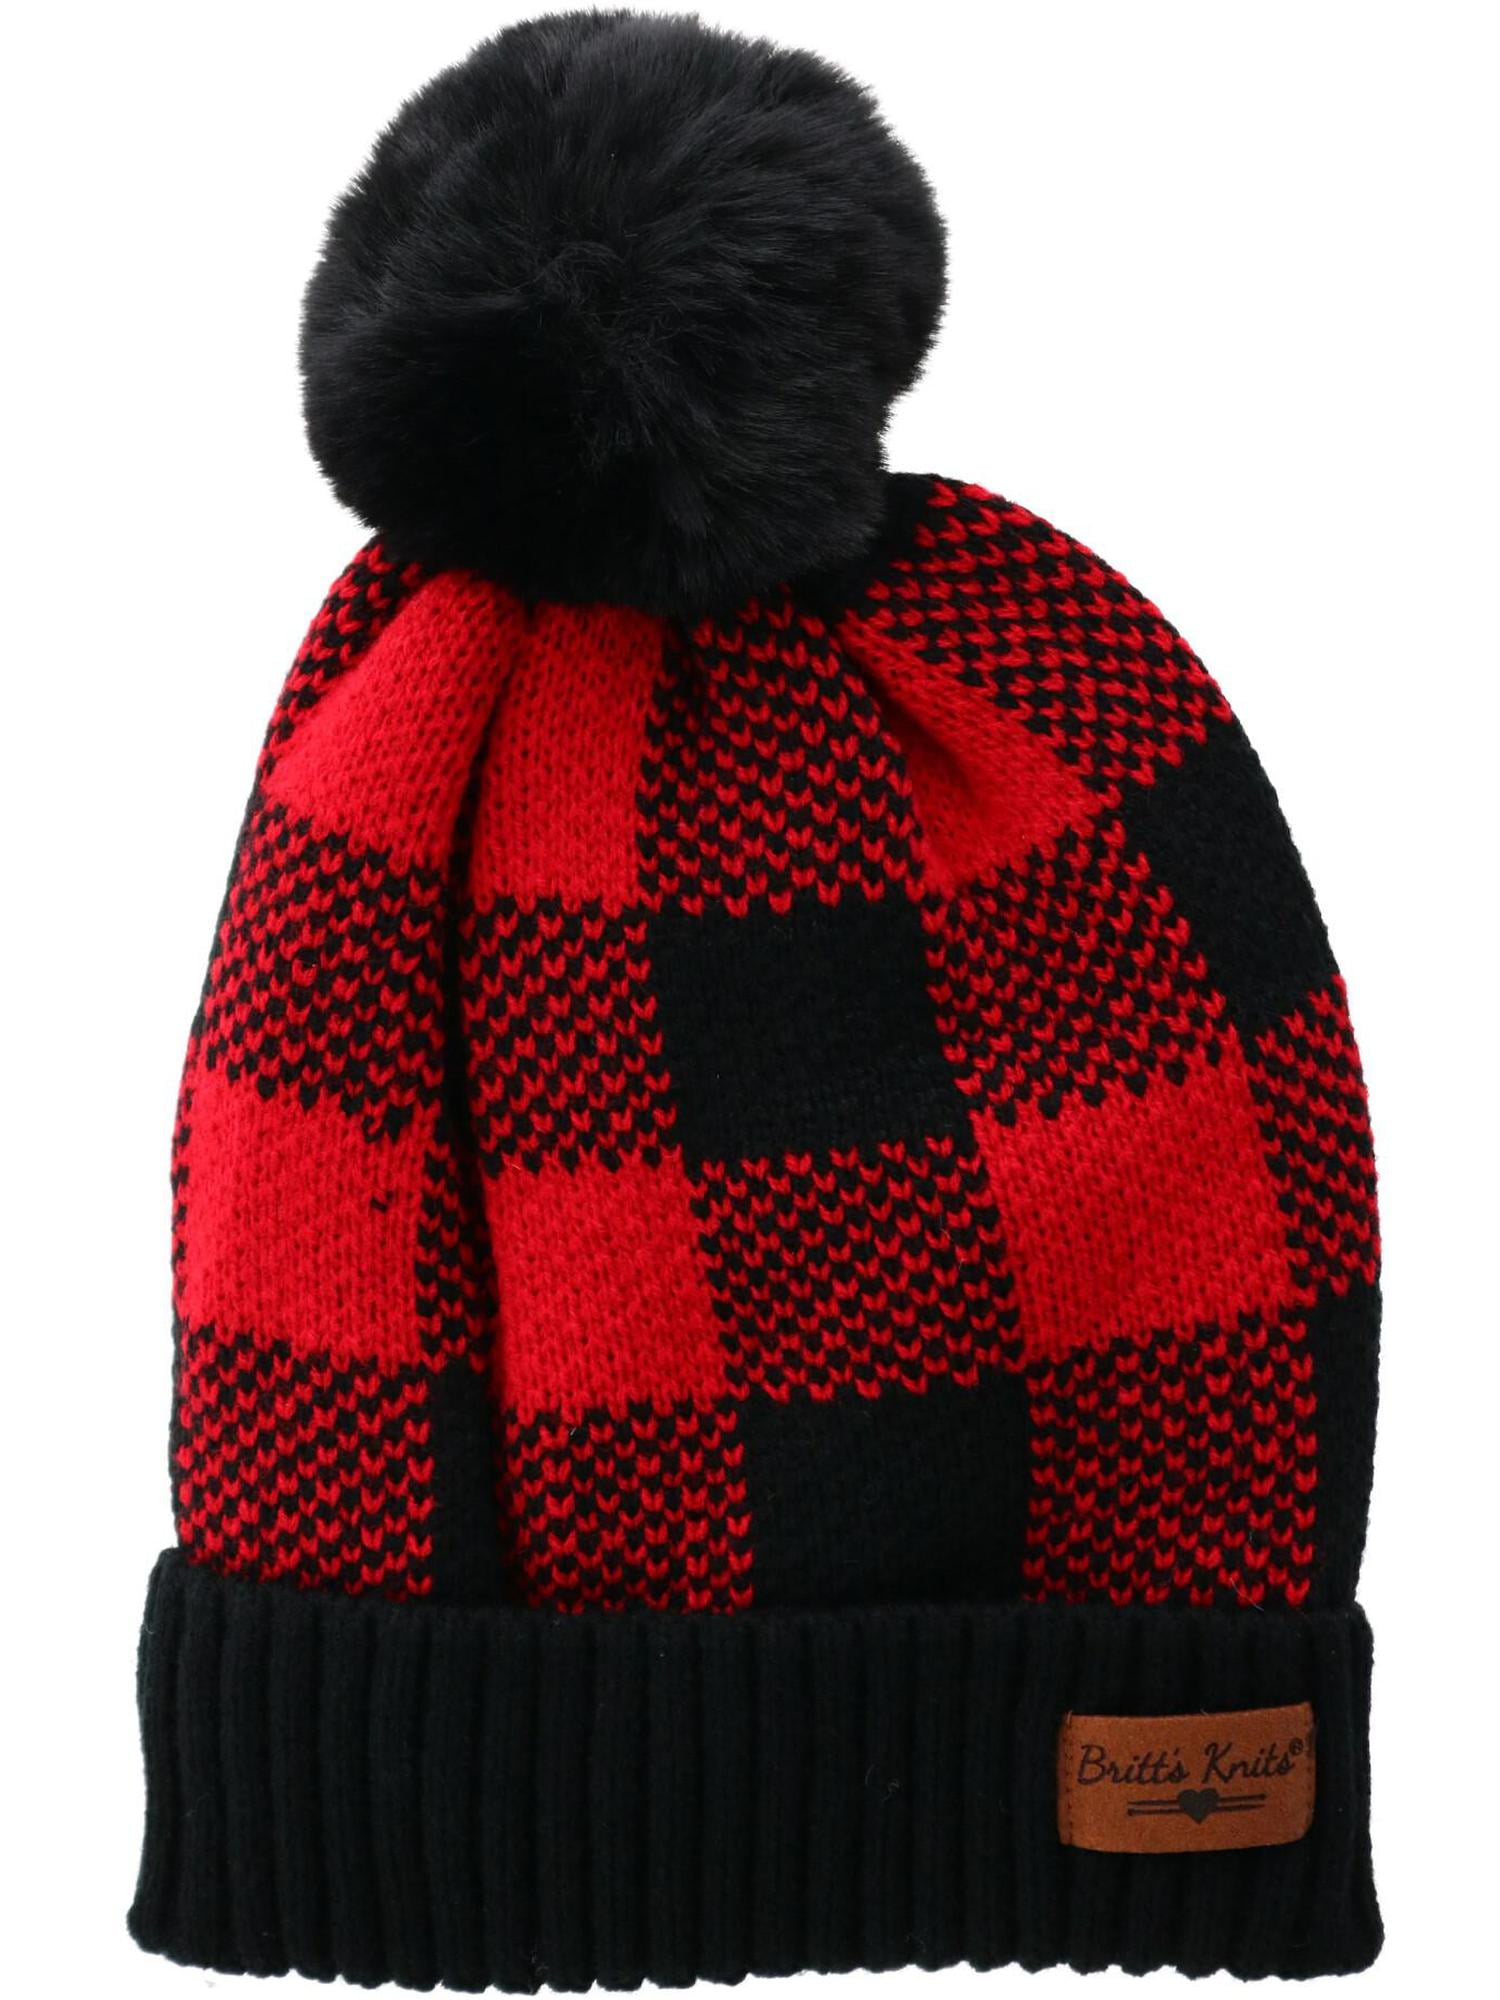 Red and Black Buffalo Plaid Knit Hat with Faux Fur Pompom